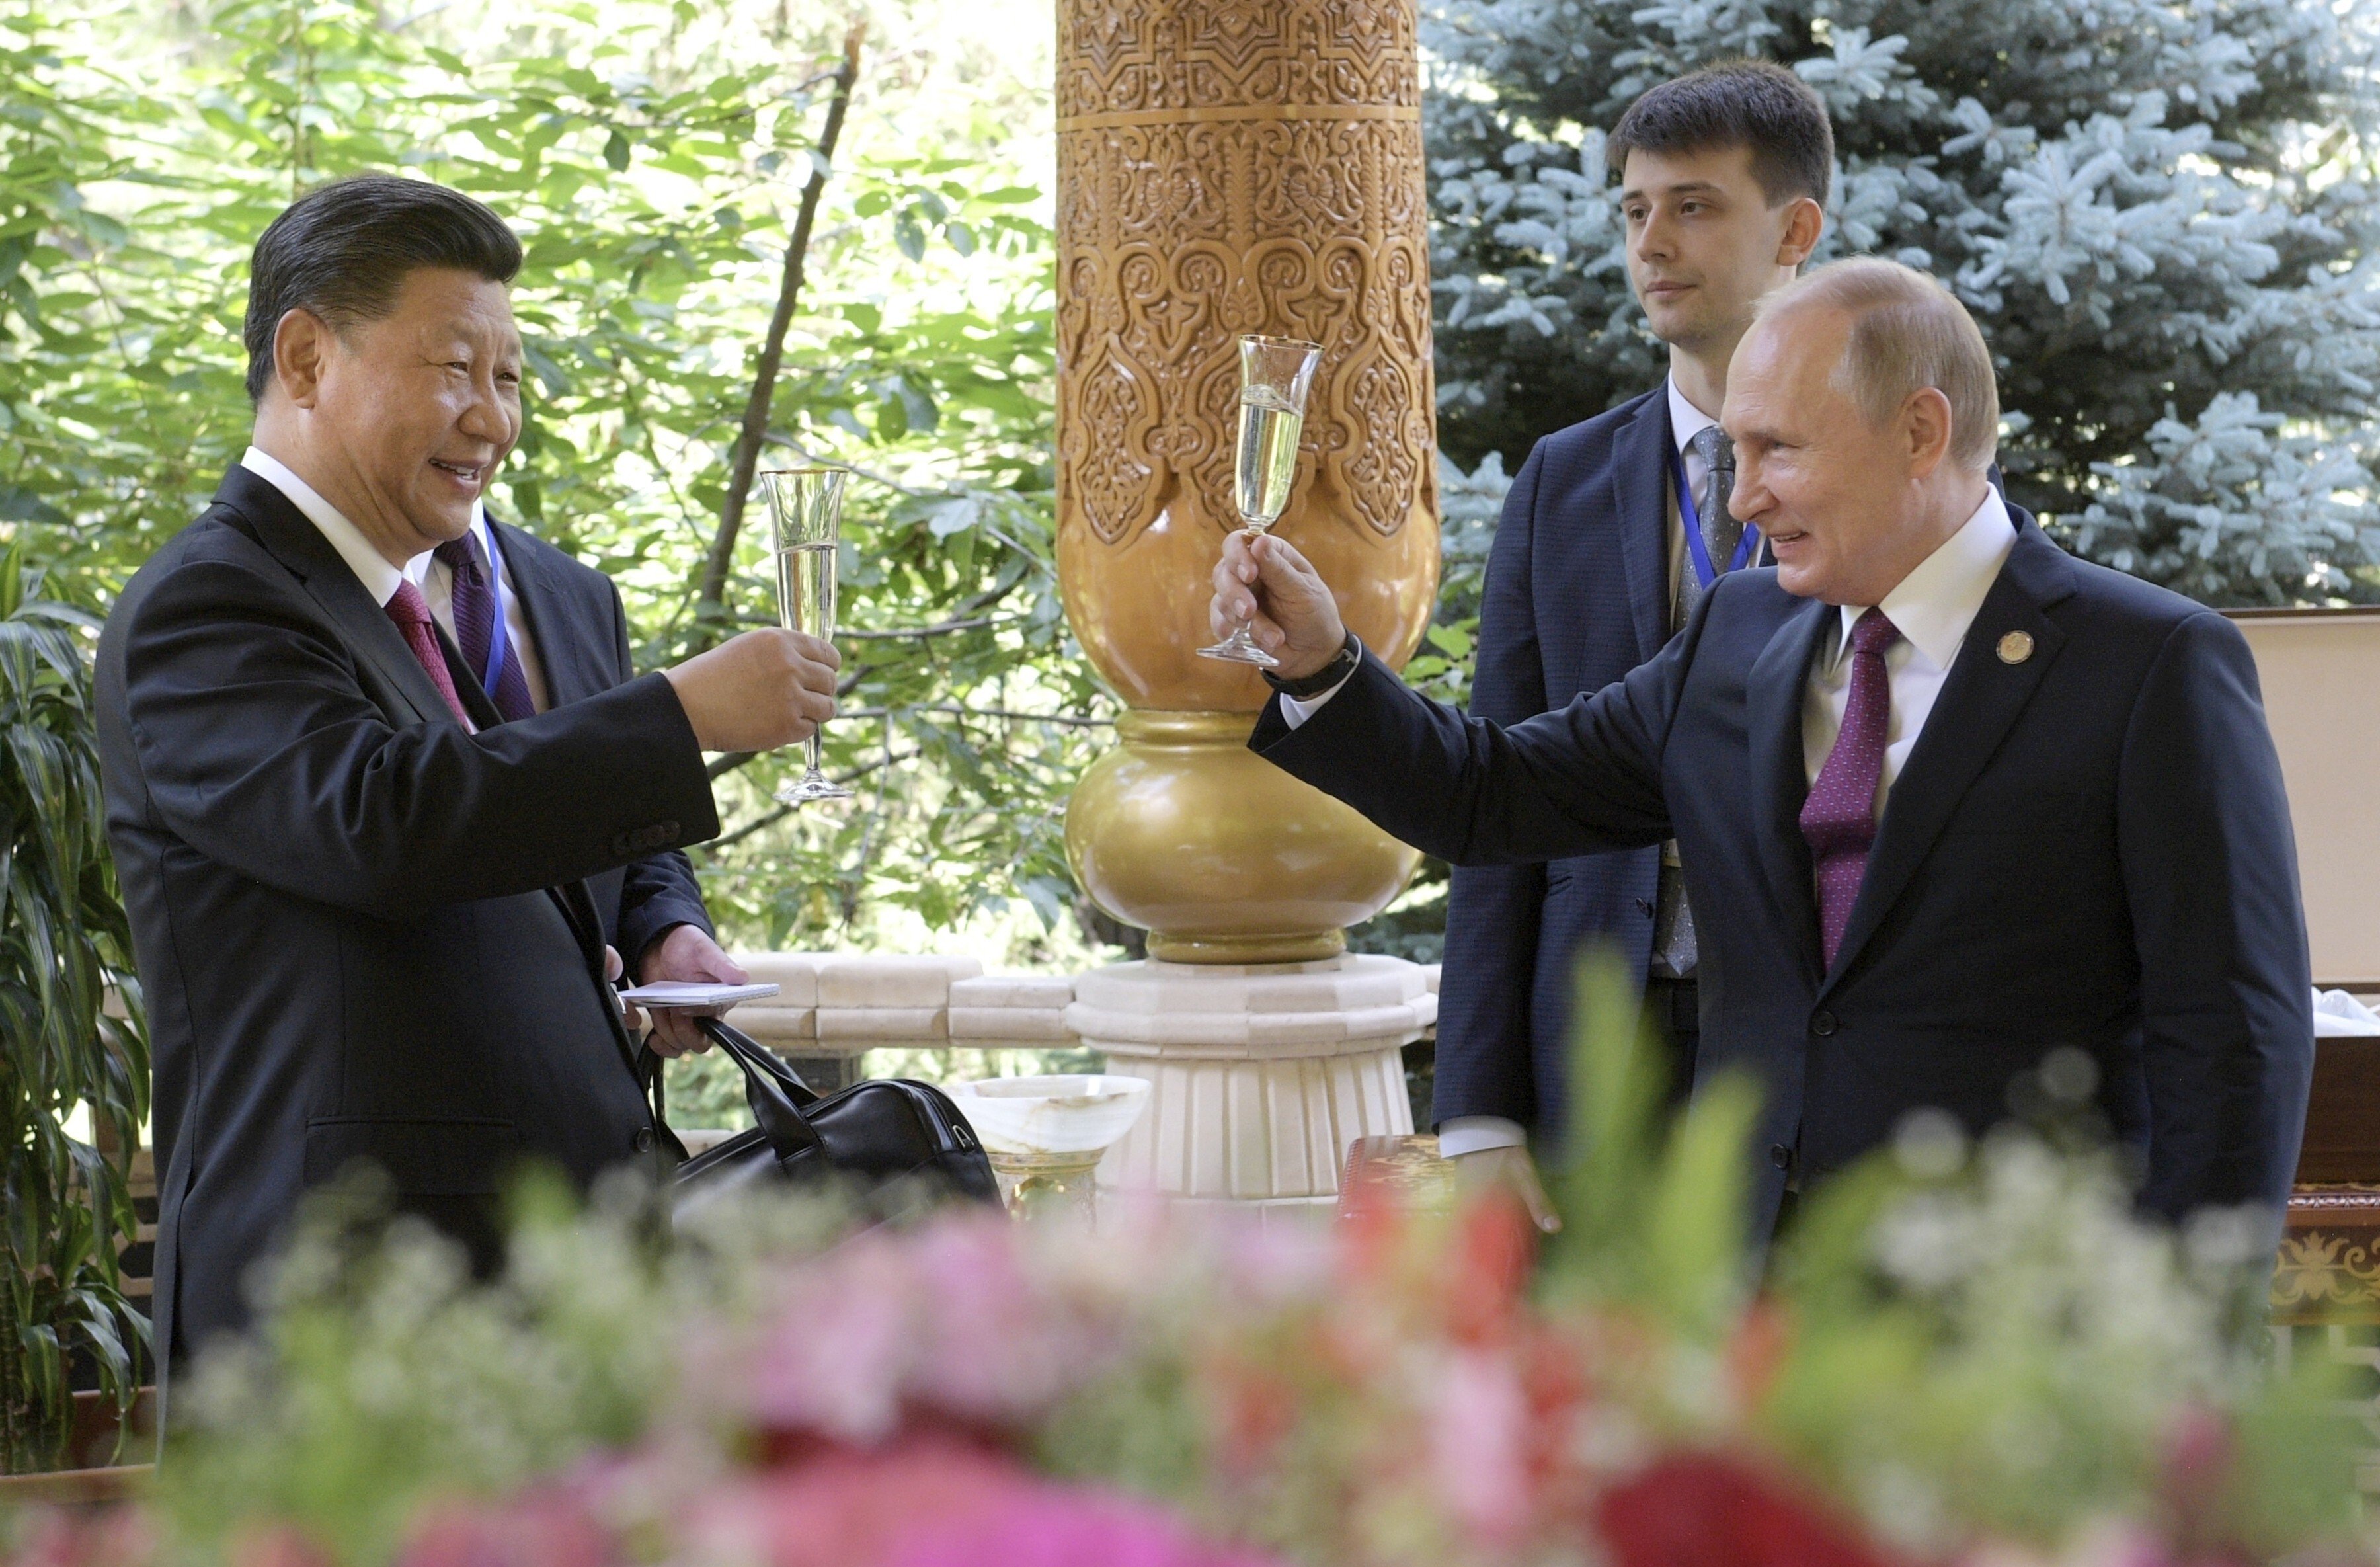 Russian President Vladimir Putin (right) and Chinese President Xi Jinping raise a toast prior to the Conference on Interaction and Confidence Building Measures in Asia in Dushanbe, Tajikistan, on June 14, 2019. Photo: AP